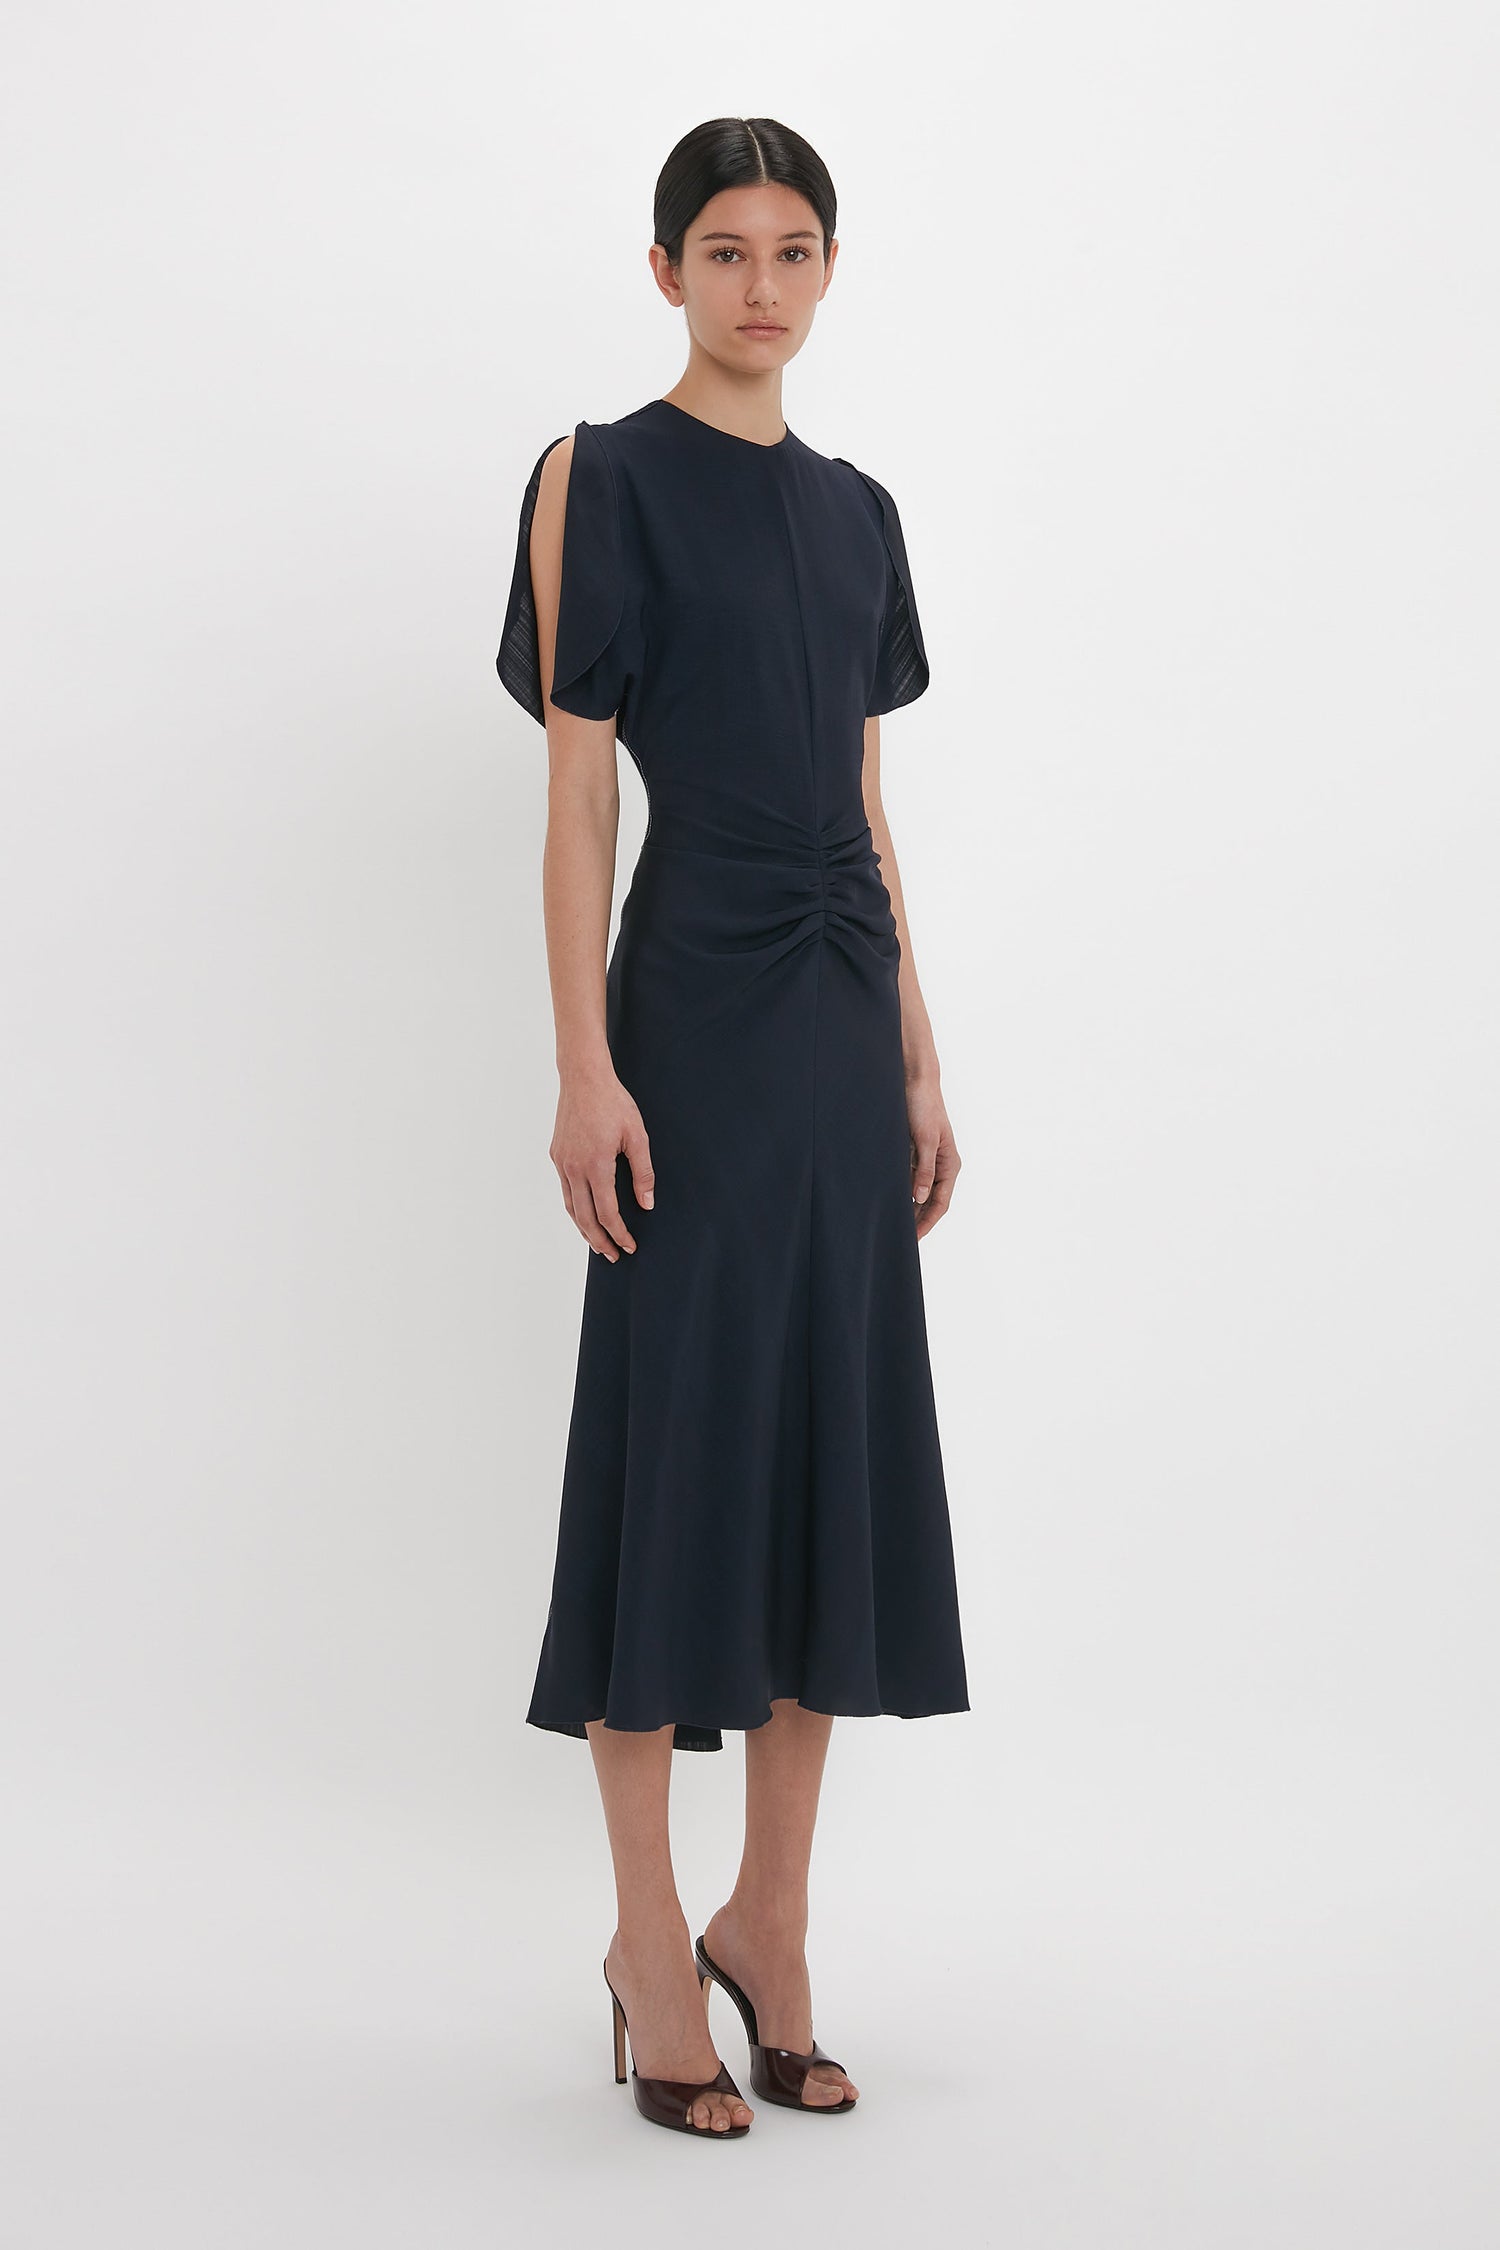 A person in a Victoria Beckham Gathered V-Neck Midi Dress In Midnight stands facing the camera, hands relaxed by their sides, and wearing black heels.